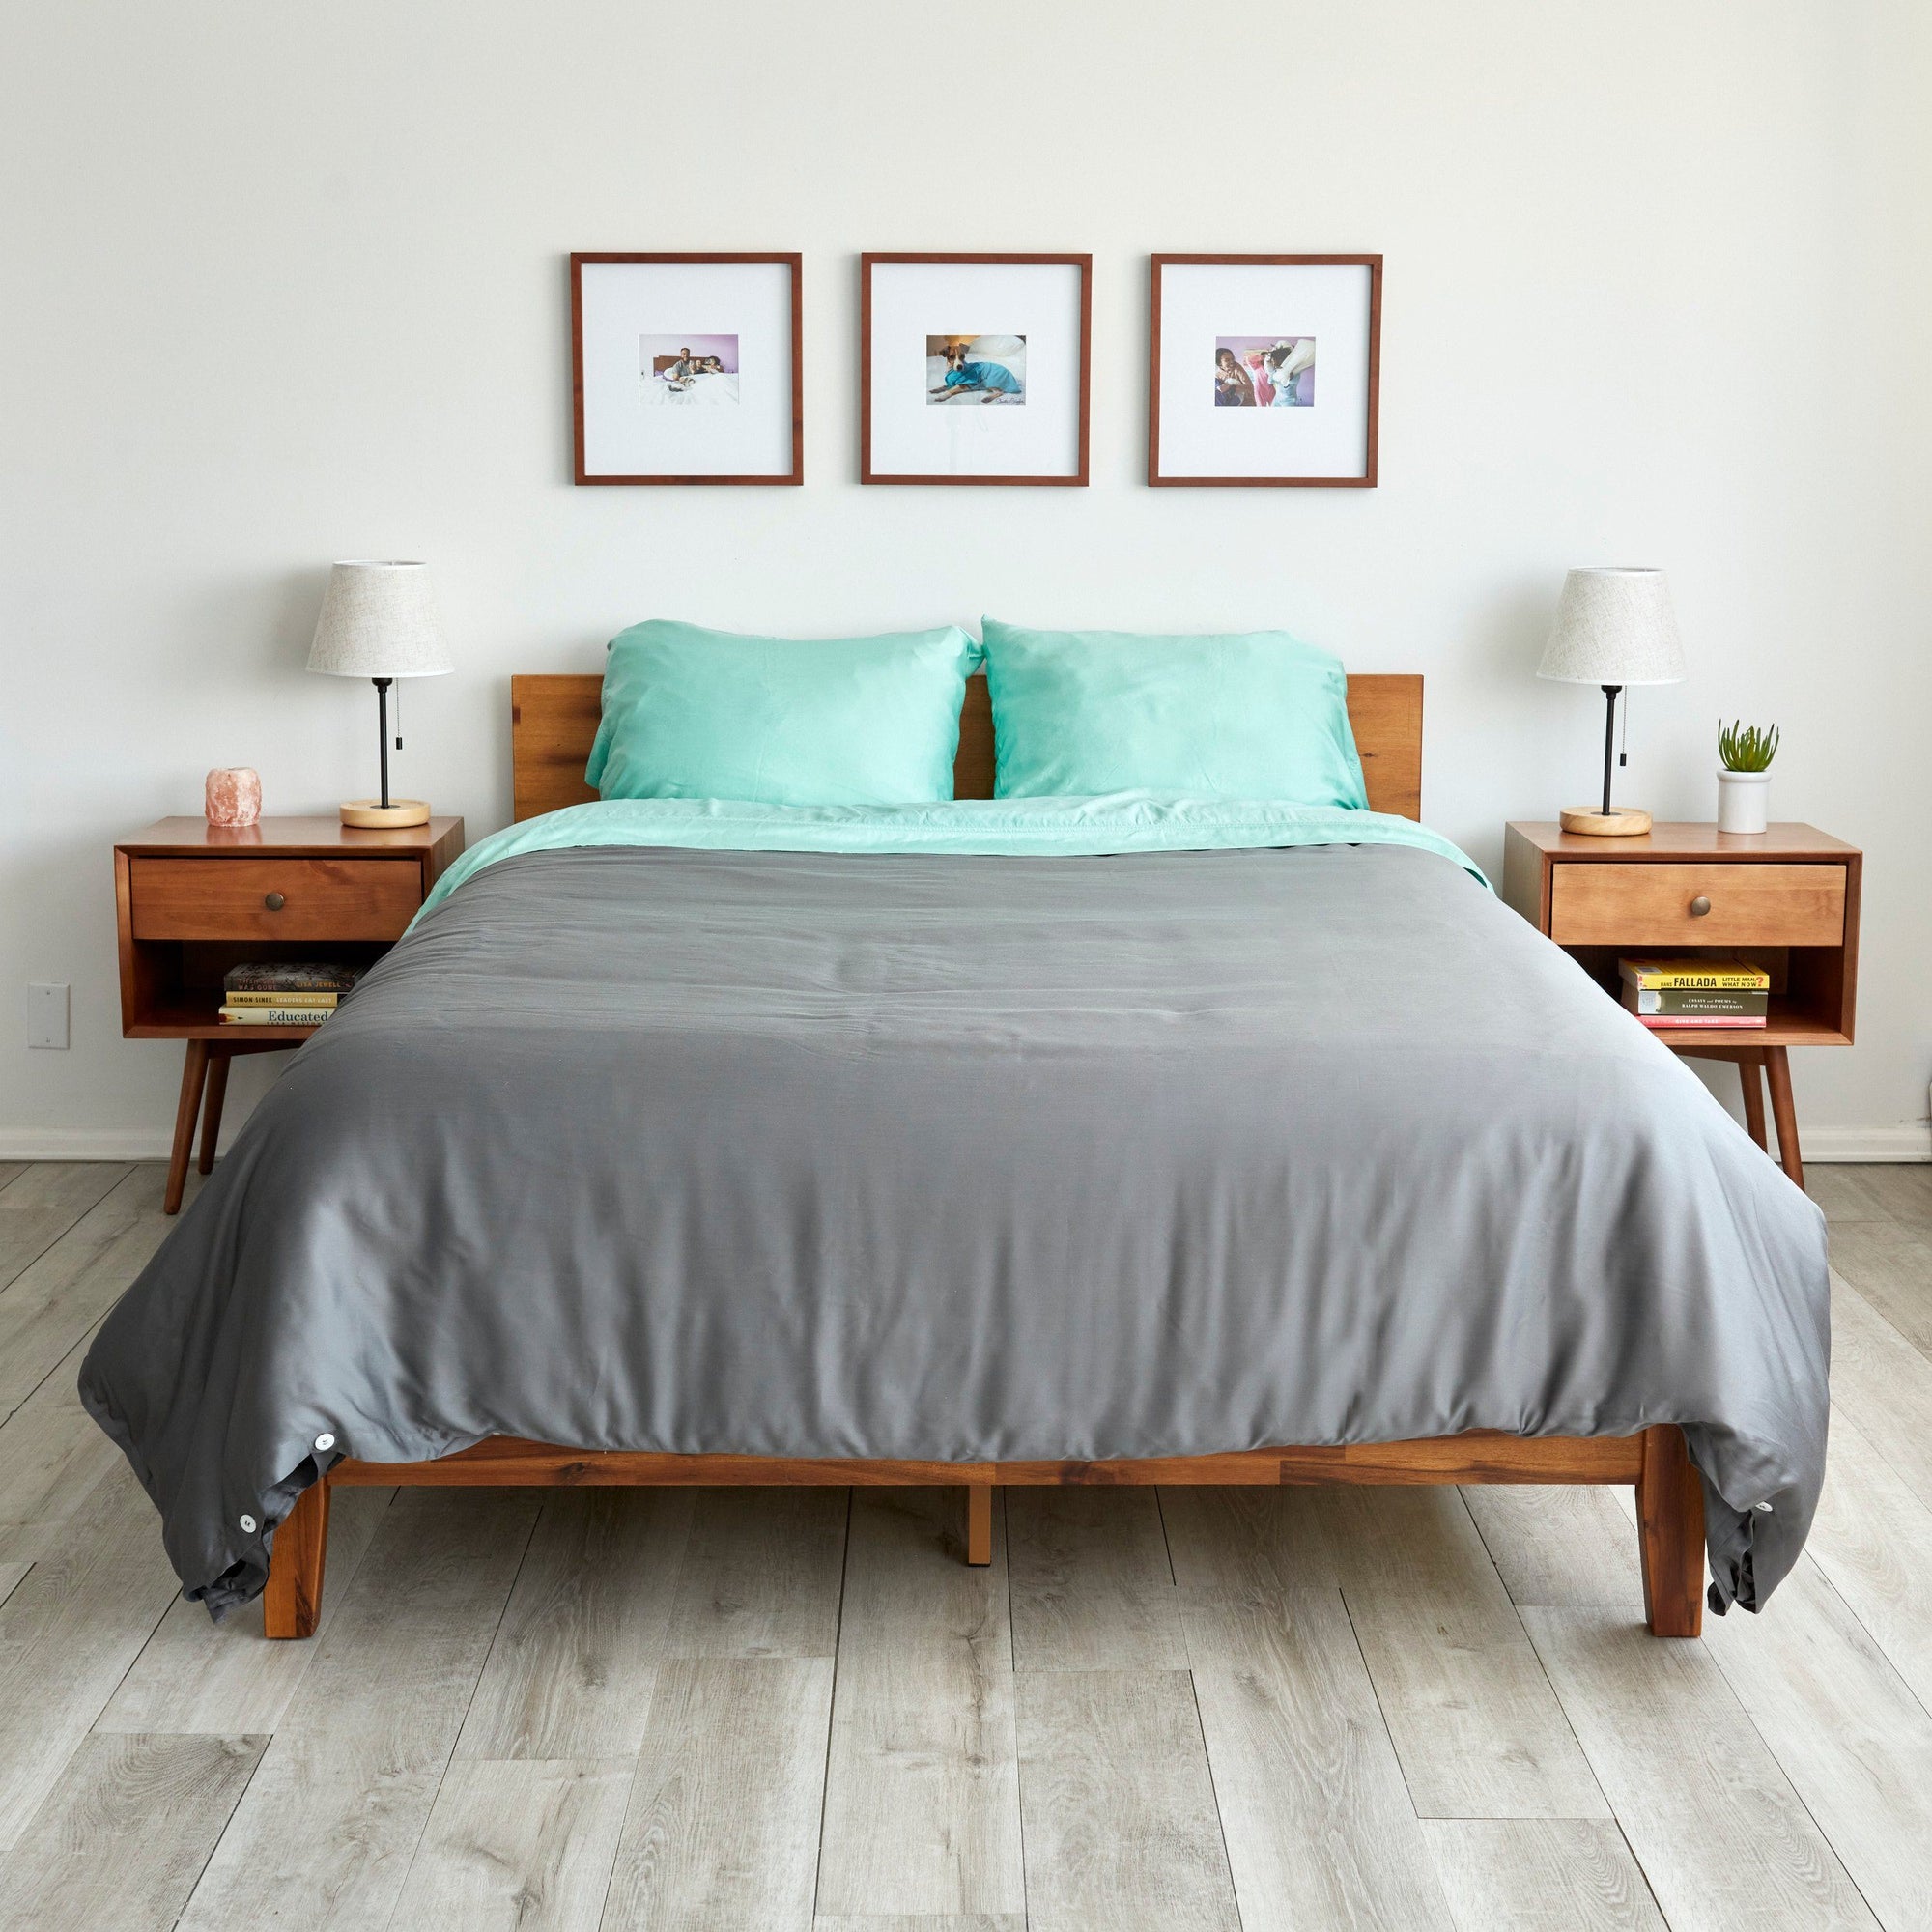 eucalyptus duvet cover in charcoal grey on a queen bed||Gray